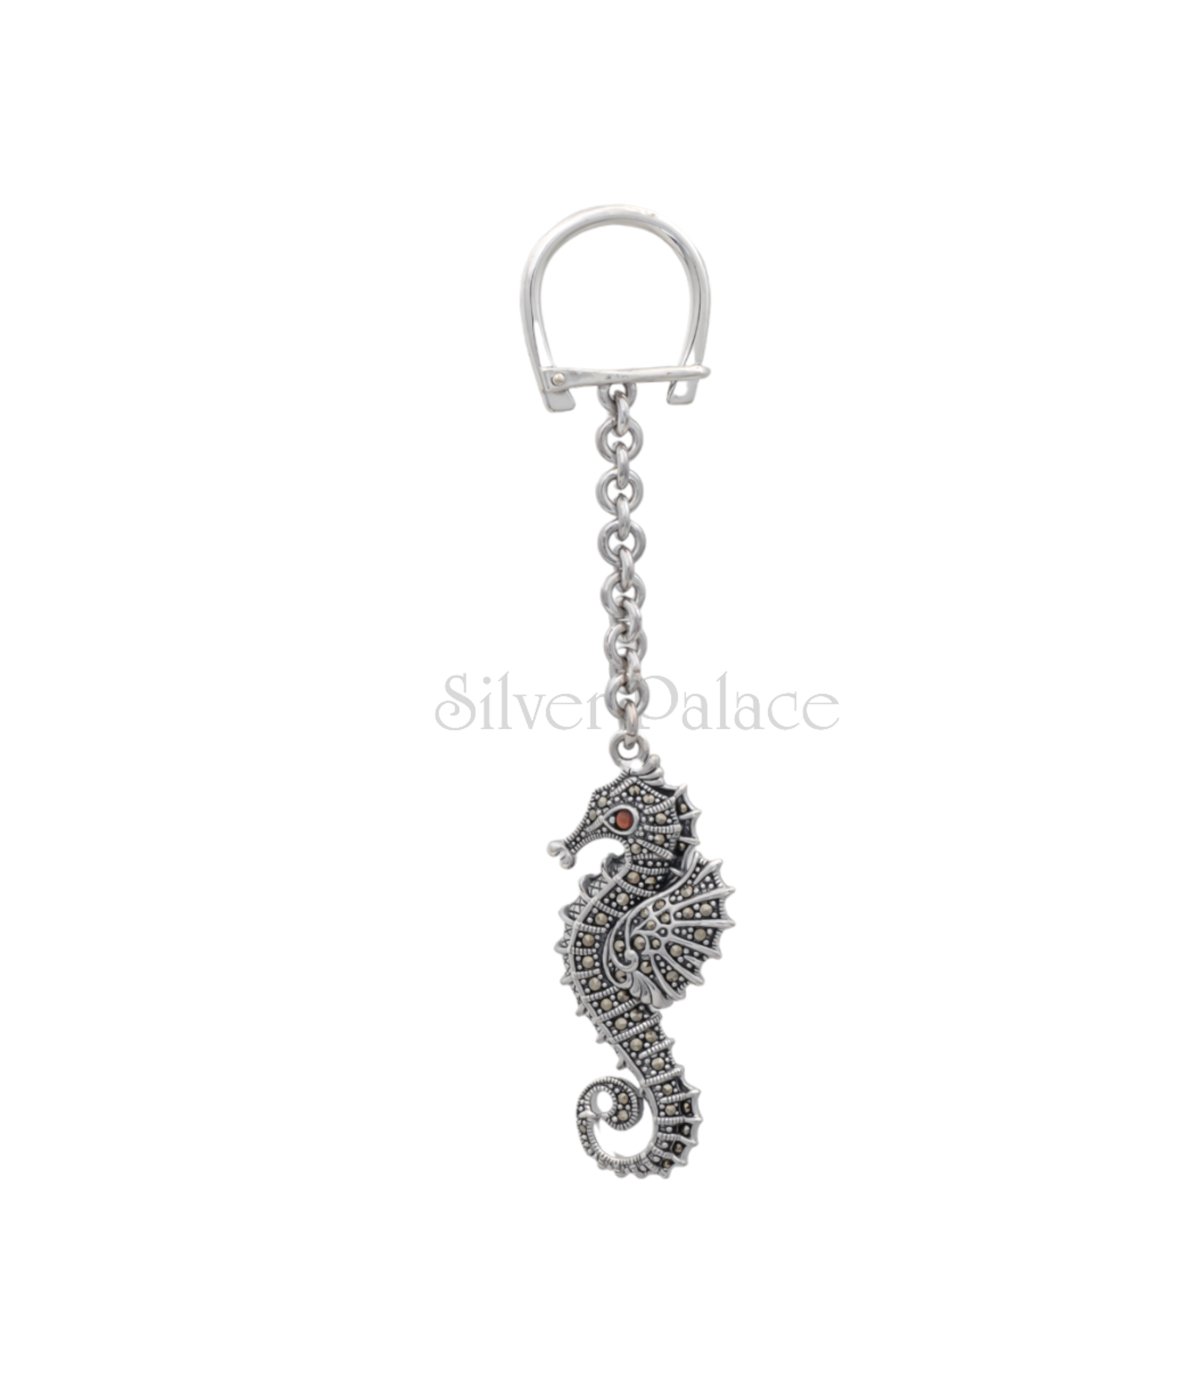 92.5 PURE SILVER RED EYE SEAHORSE KEYCHAIN FOR MEN